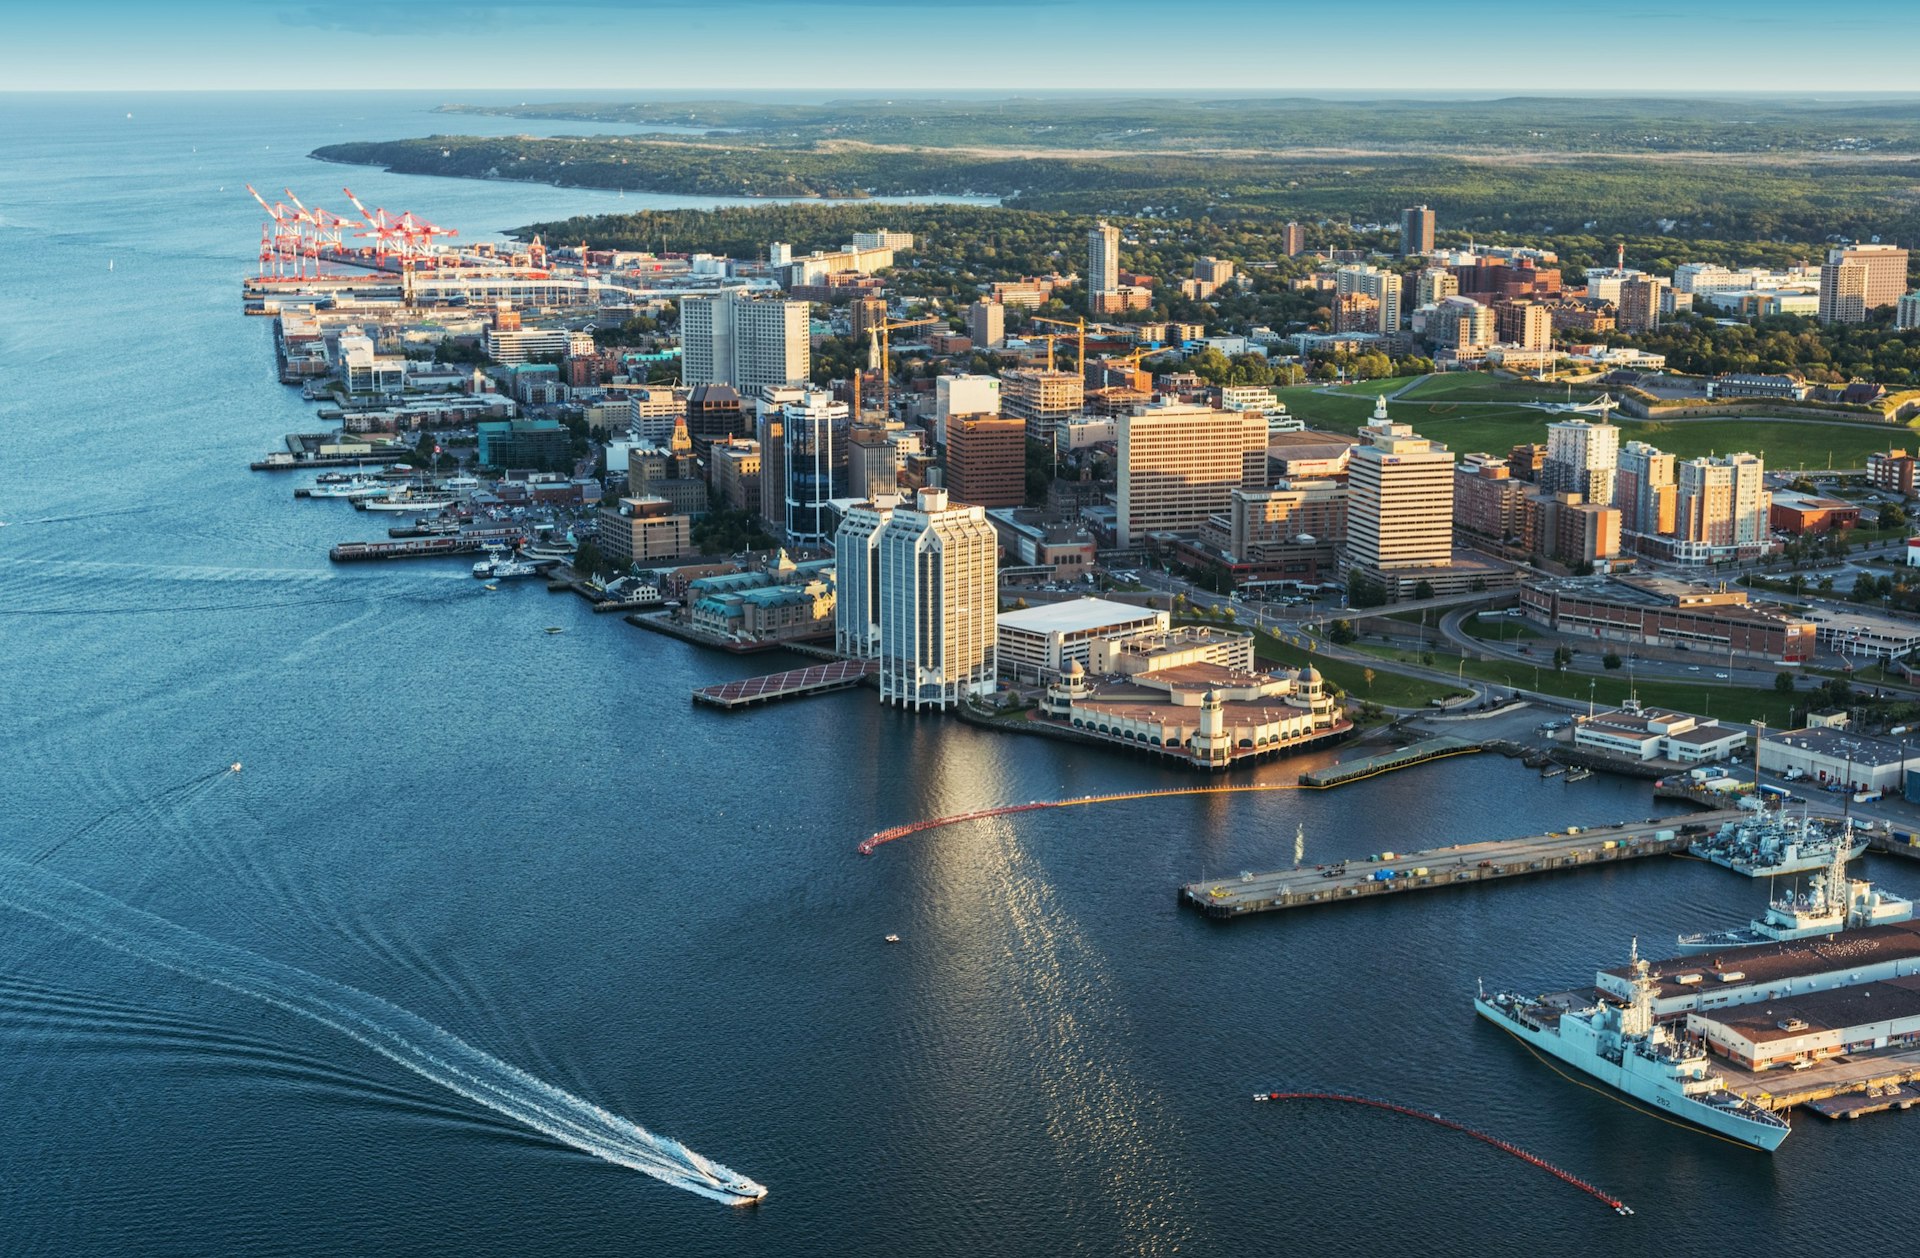 A low-altitude aerial look at the Halifax Waterfront in Canada from just offshore with buildings and boats along the coastline